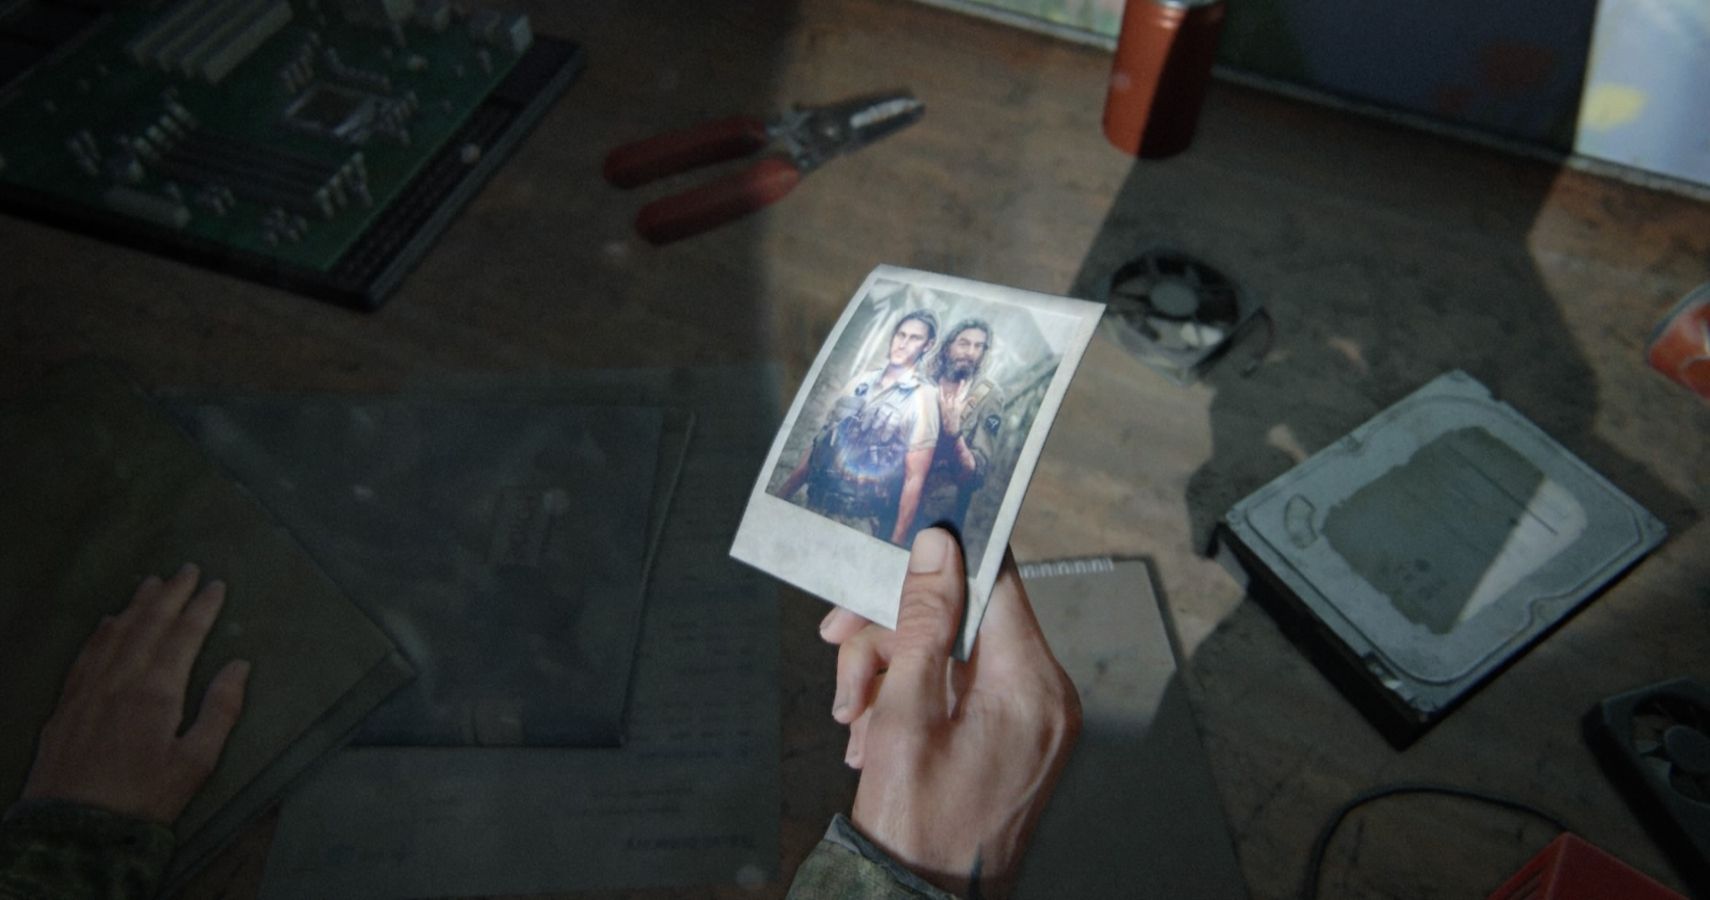 Naughty Dog Drops Tips For Taking The Most Awesome Photos In The Last Of Us 2